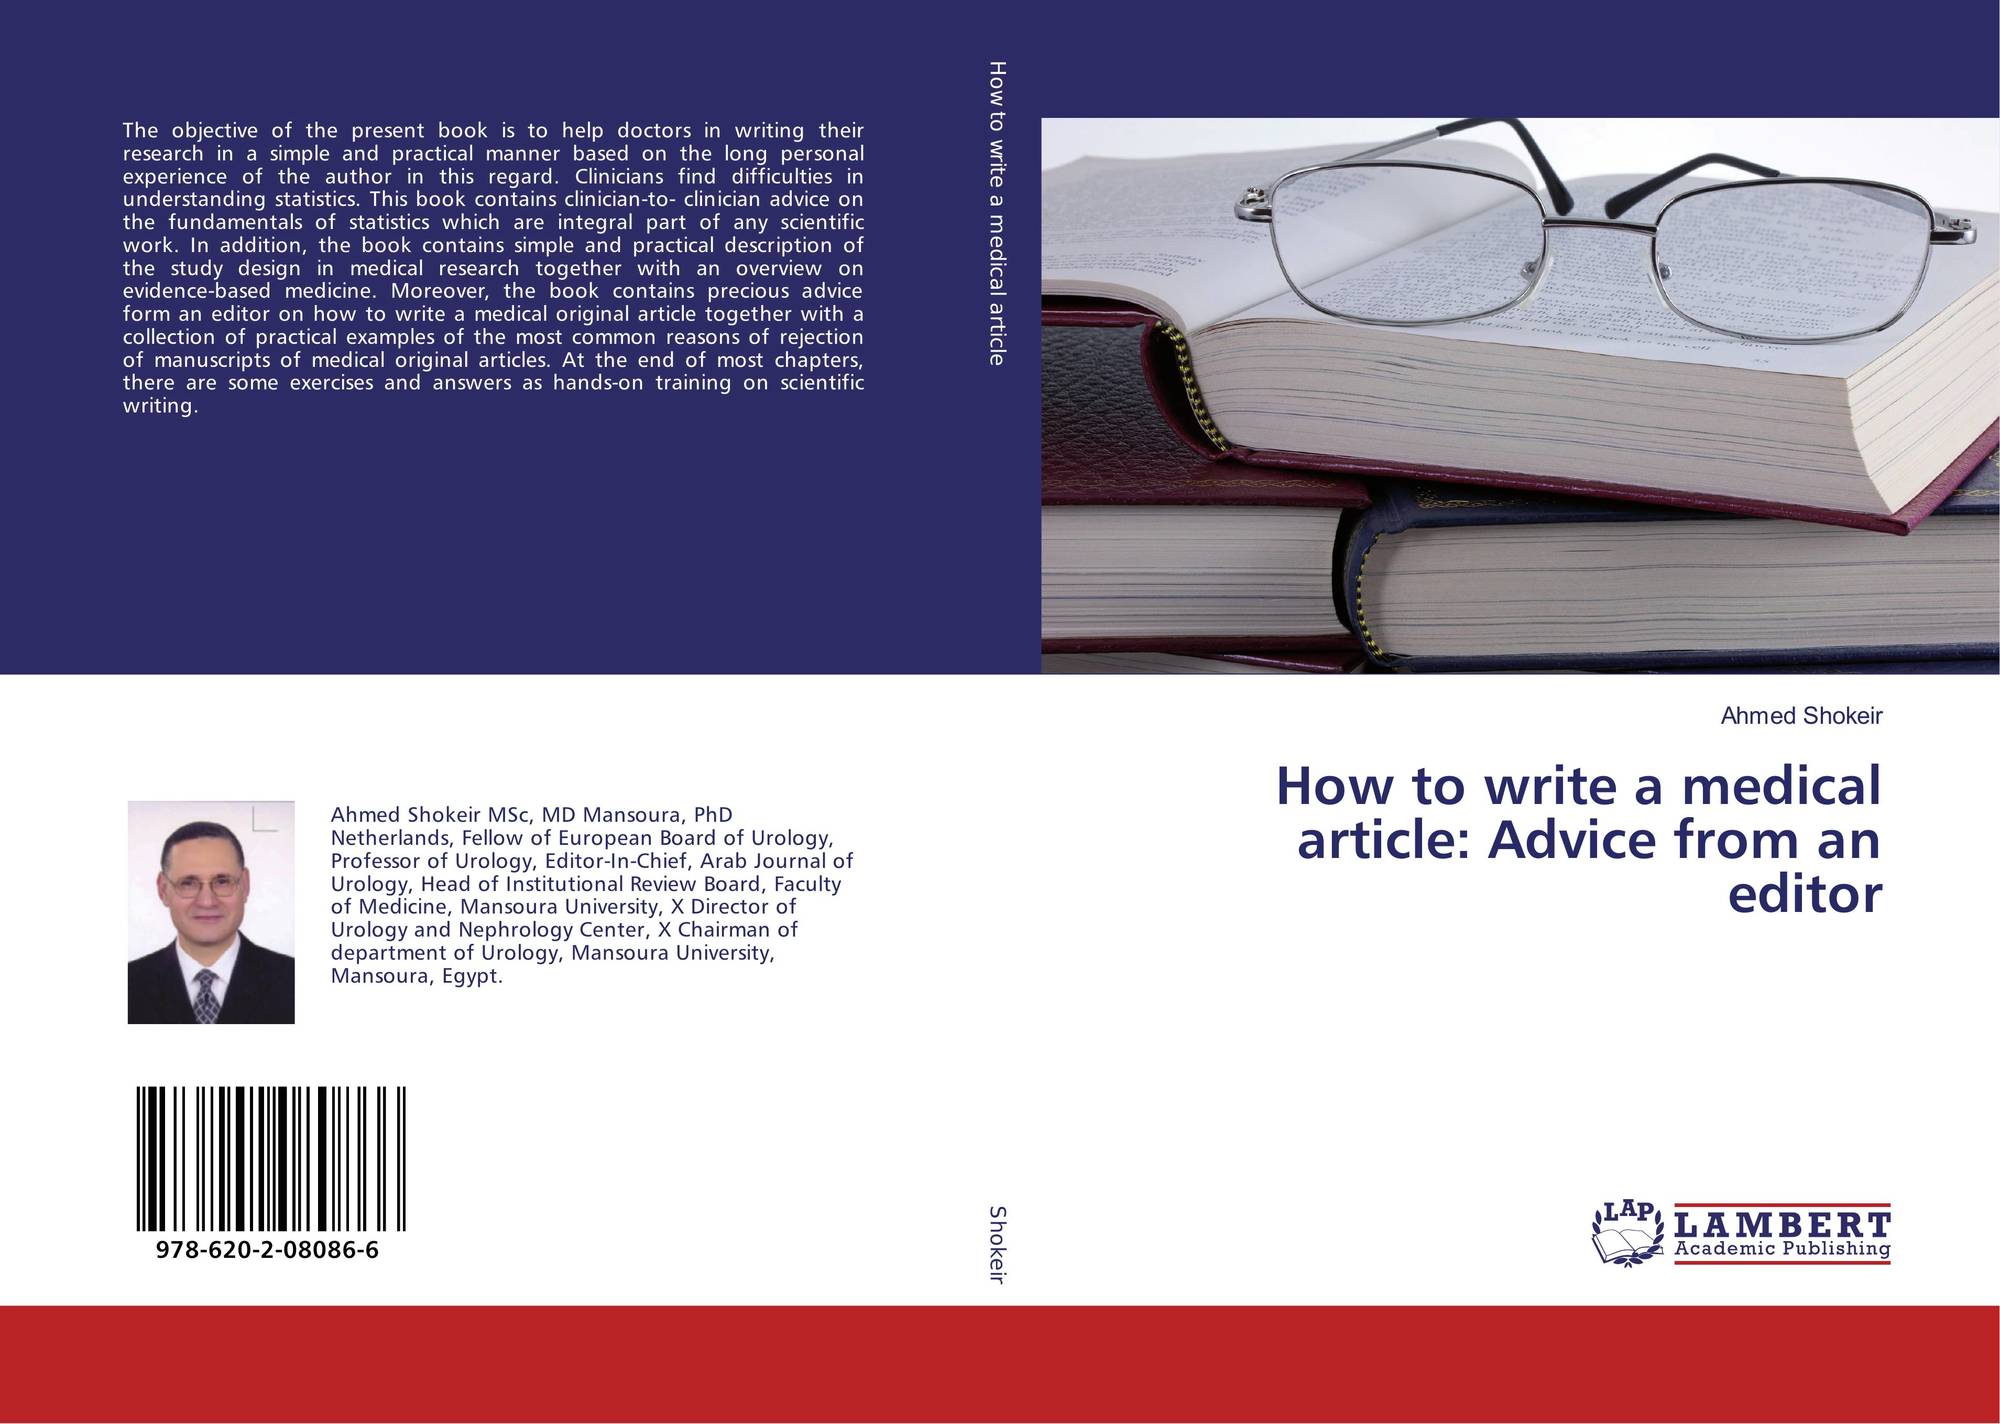 How to write a medical article: Advice from an editor, 288-288-28